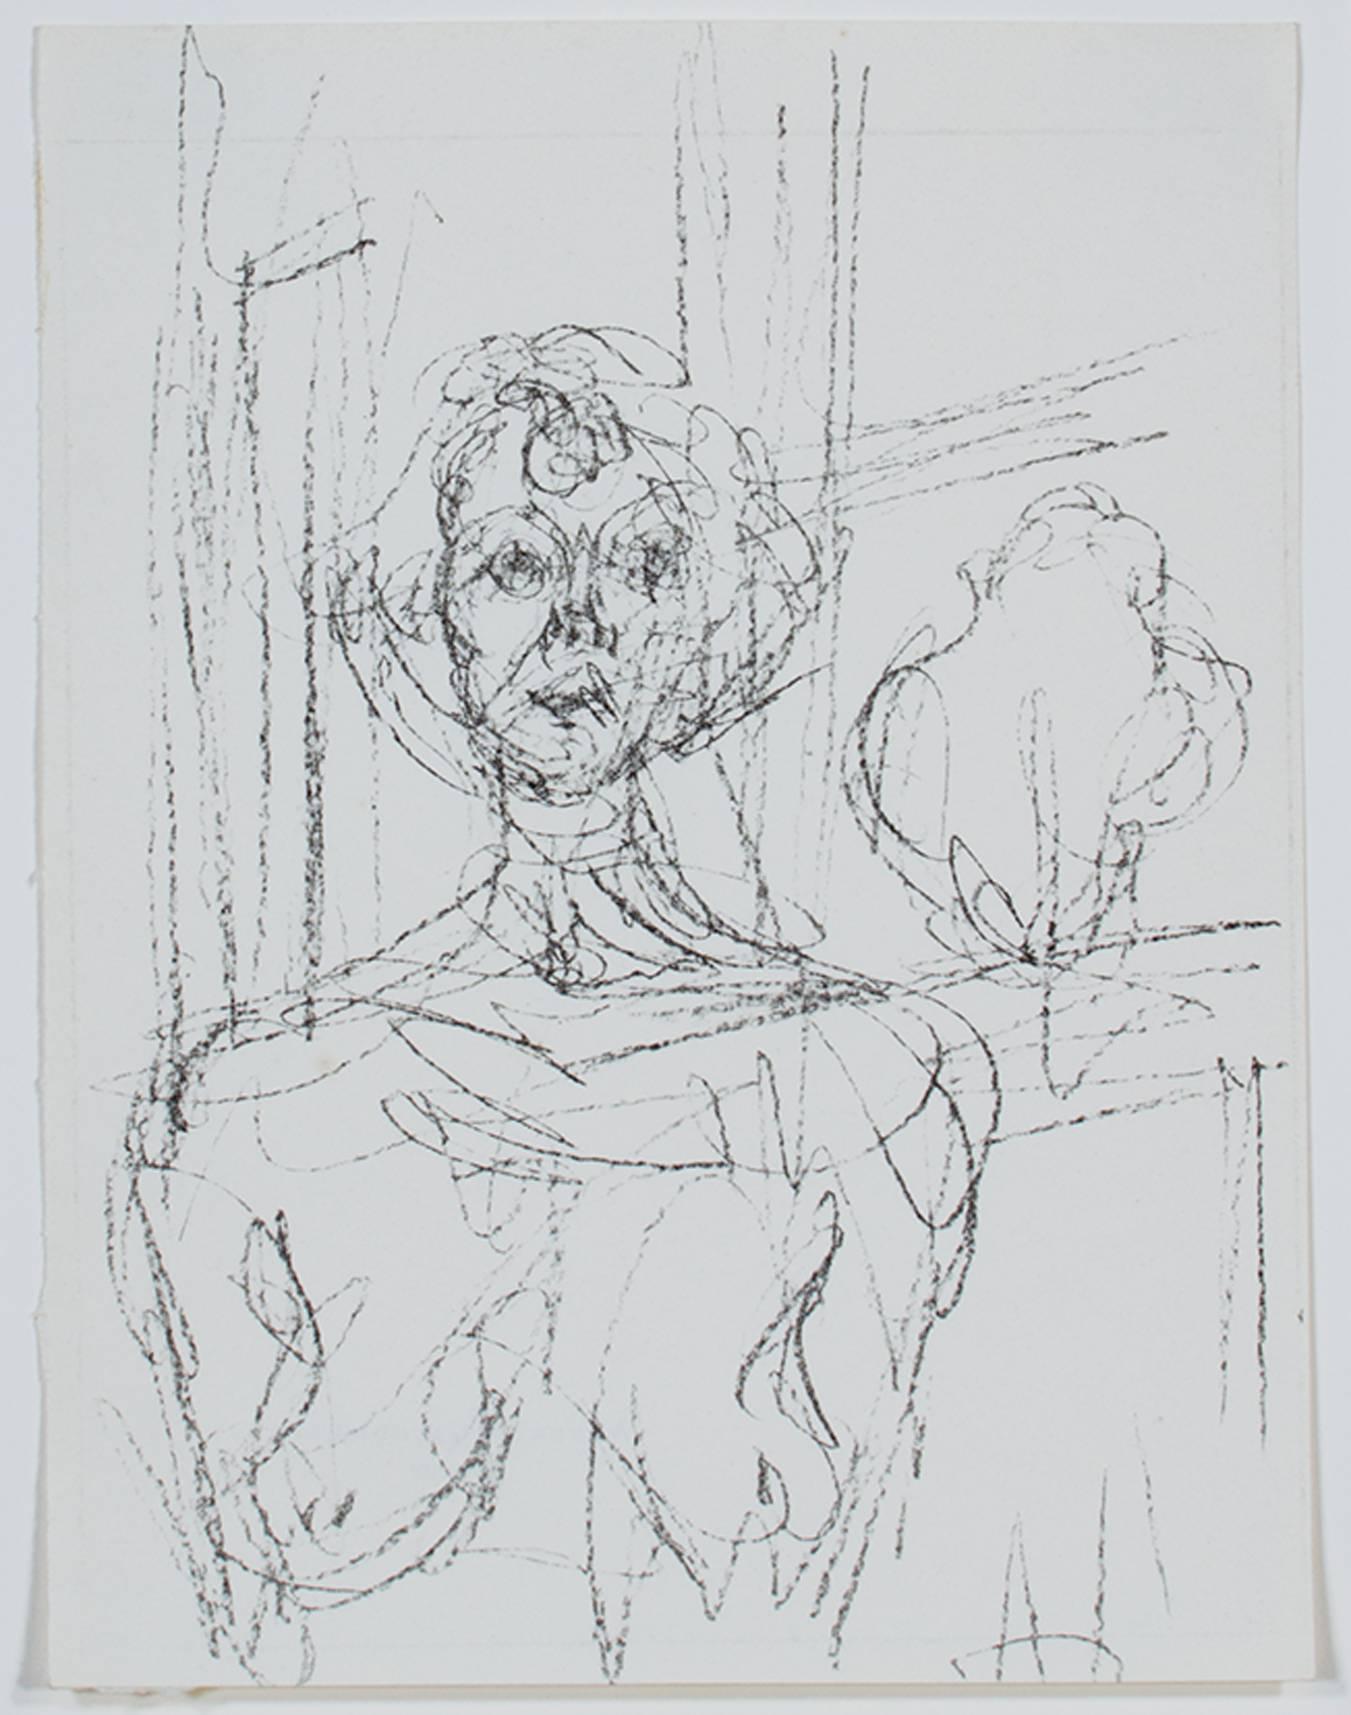 "Annette" is an original black and white lithograph by Alberto Giacometti. It depicts the bust of a nude woman in scratchy lines. Annette was Alberto's wife and frequently modeled for his sculptures and drawings. 

10" x 7 1/4" art
21 1/4" x 18 5/8"